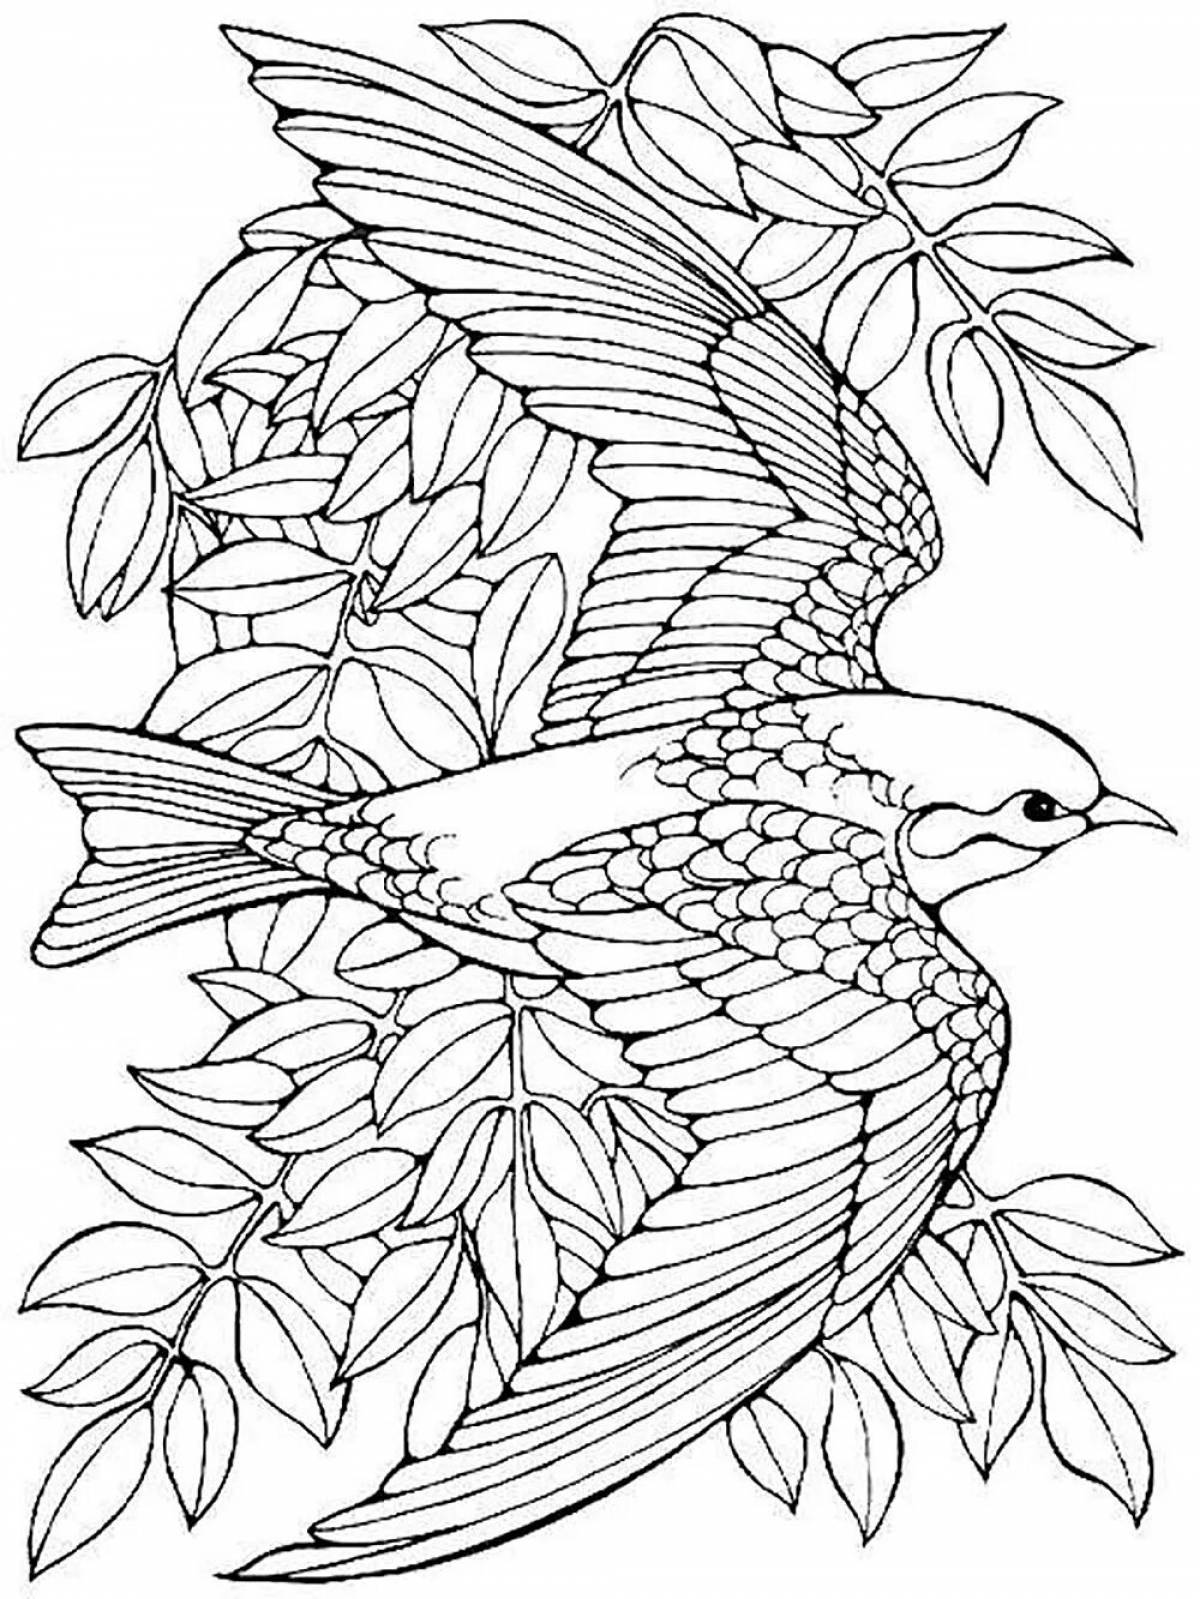 Sparkling bird girls coloring pages